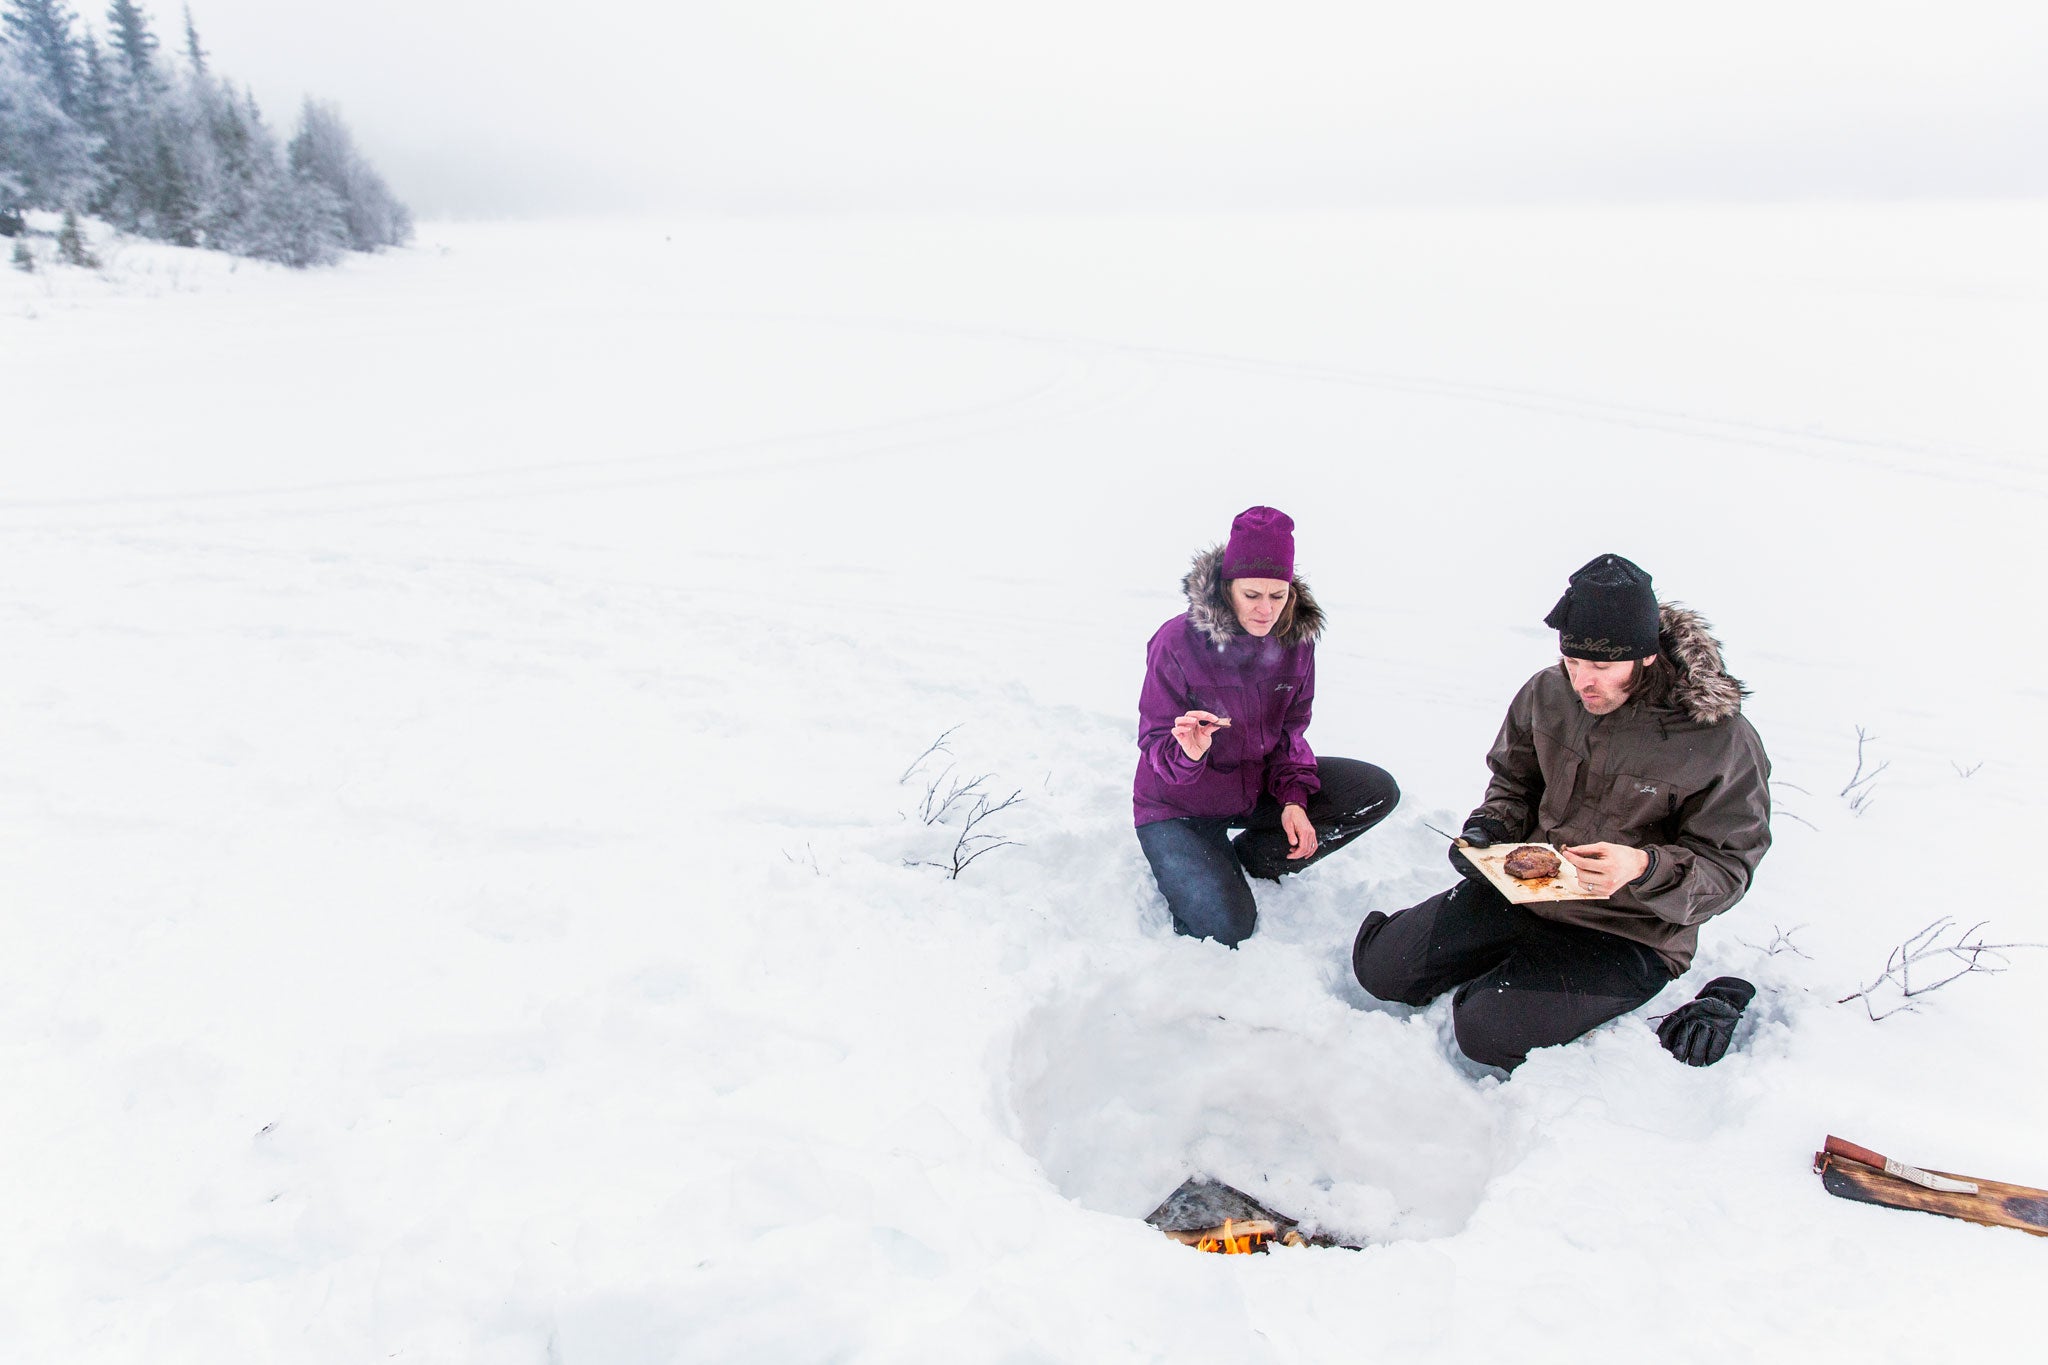 Susie Mesure and Niklas Ekstedt gather around the fire pit they have built in the snow